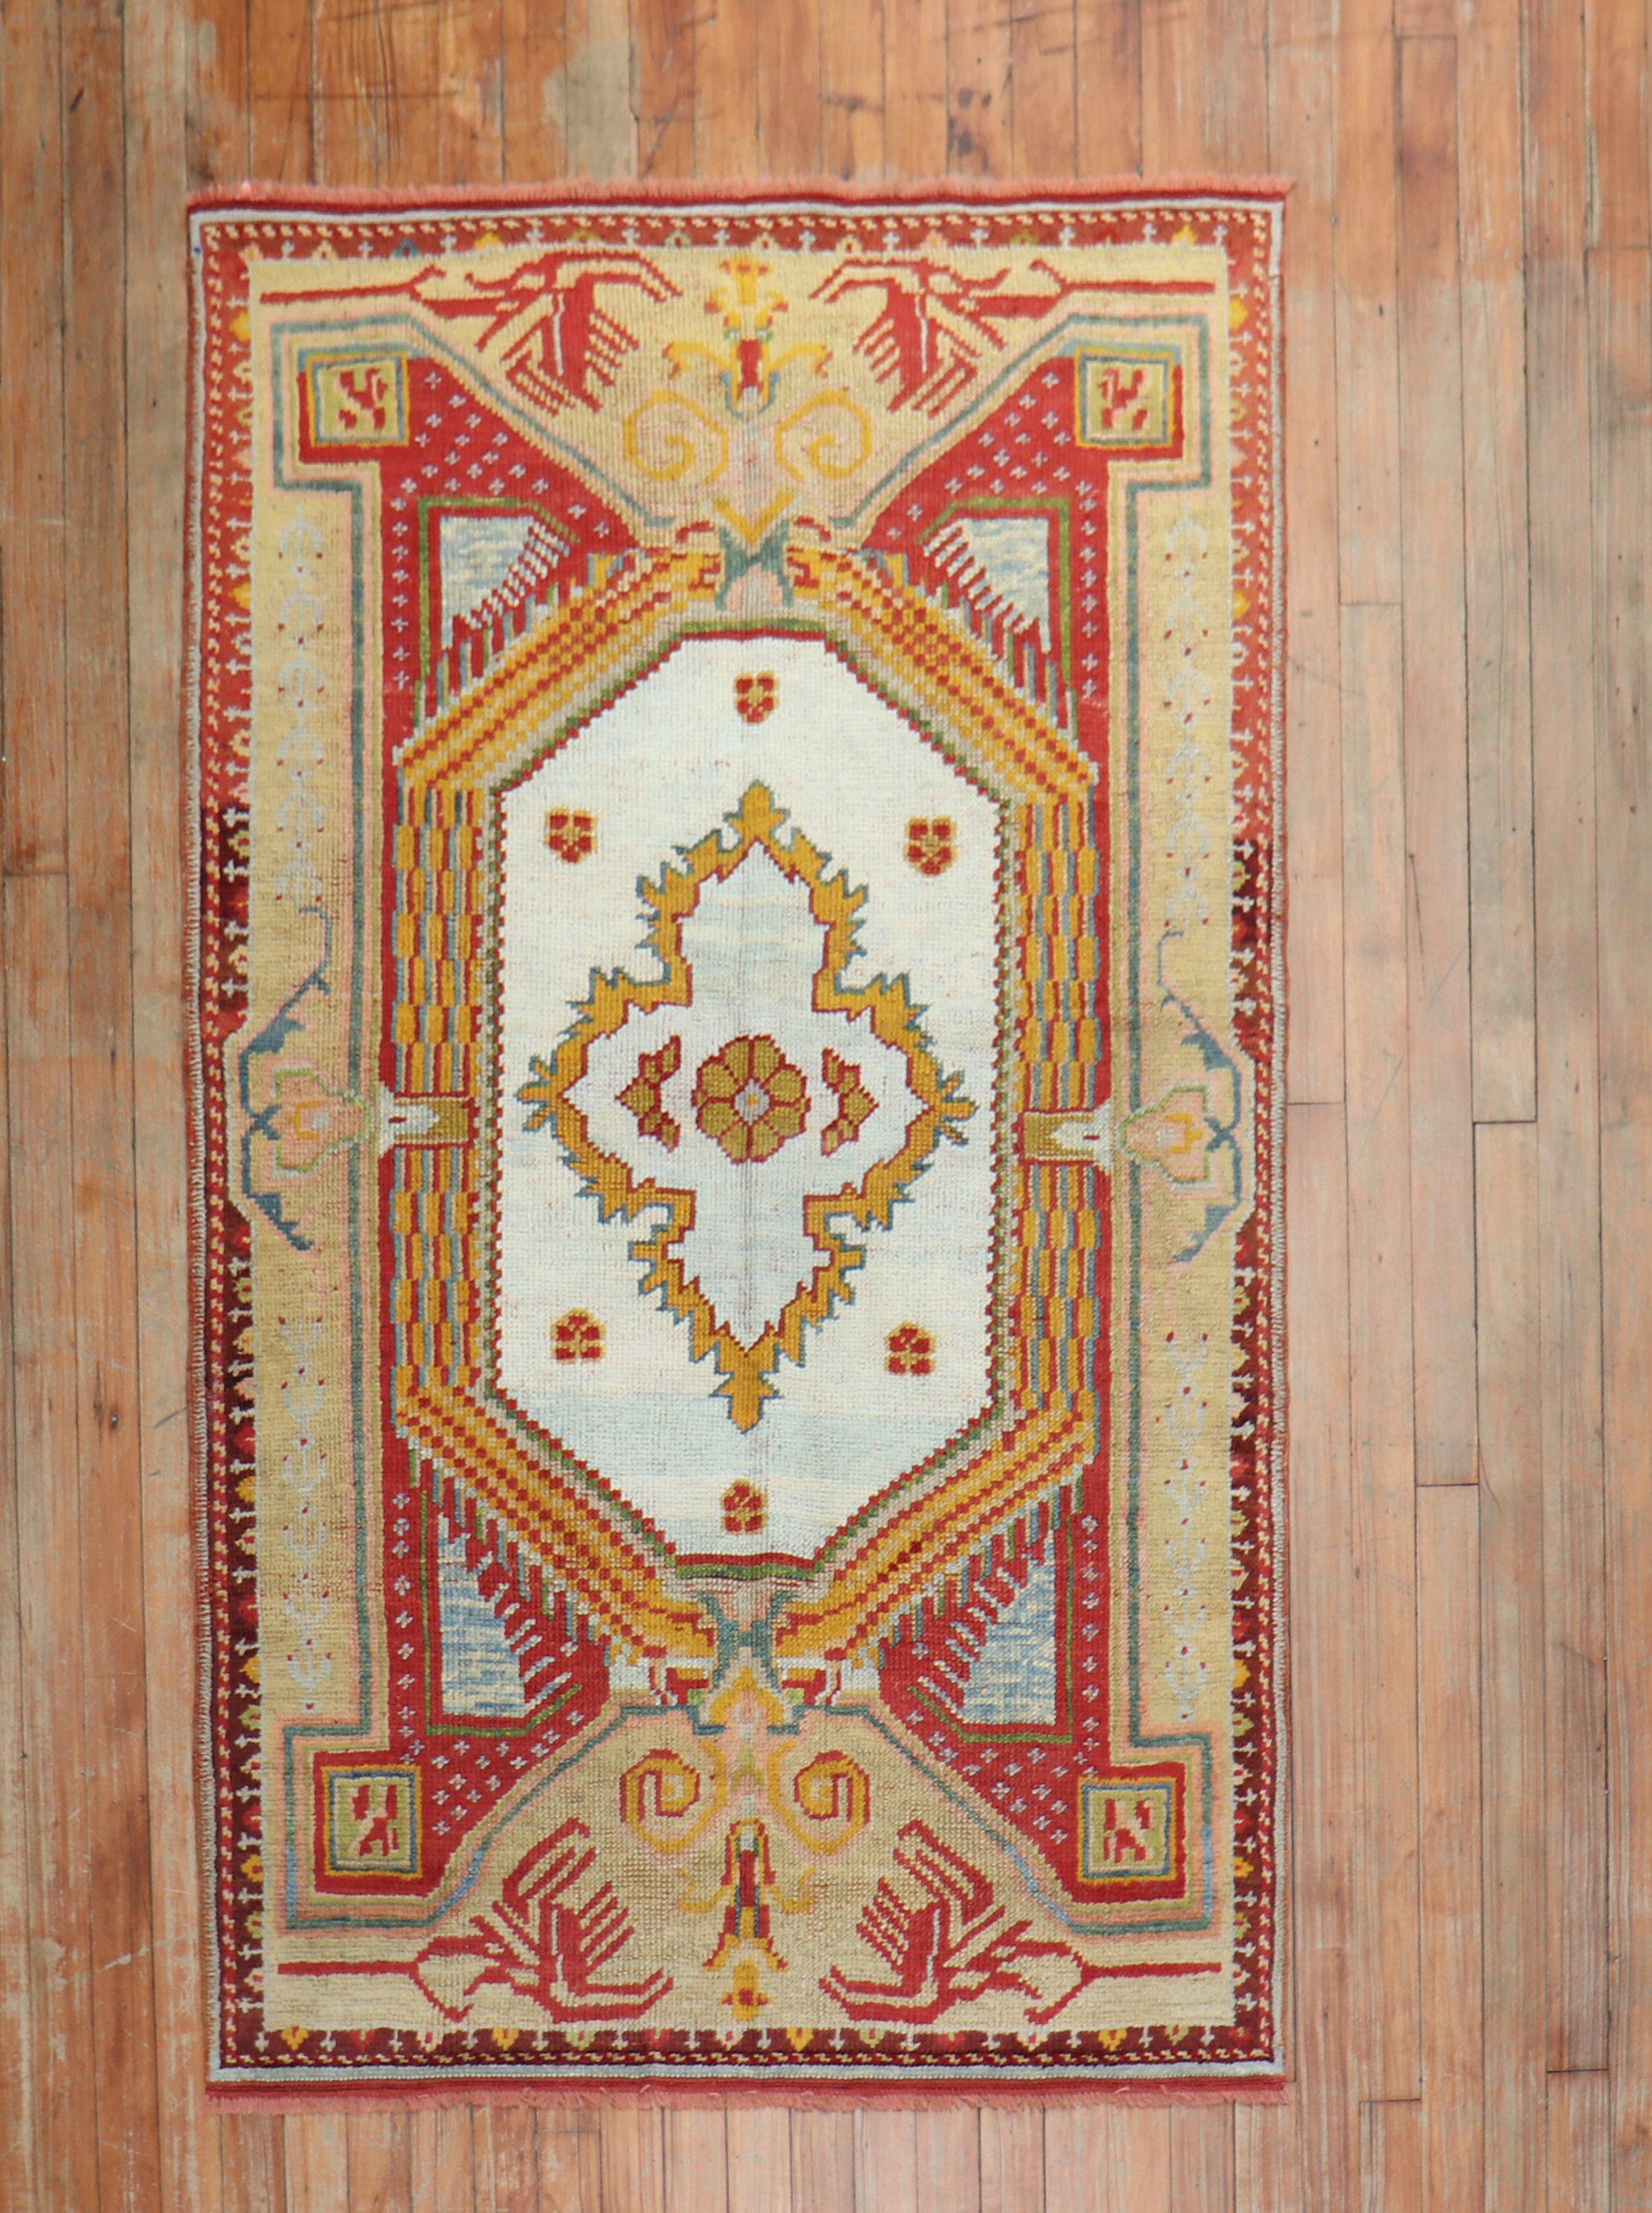 A colorful antique Turkish Ghiordes rug from the second quarter of the 20th century.

Measures: 3'8'' x 5'5''

Since the beginning of their production in the 18th century, rugs from the Turkish town, Ghiordes have mostly been known for their